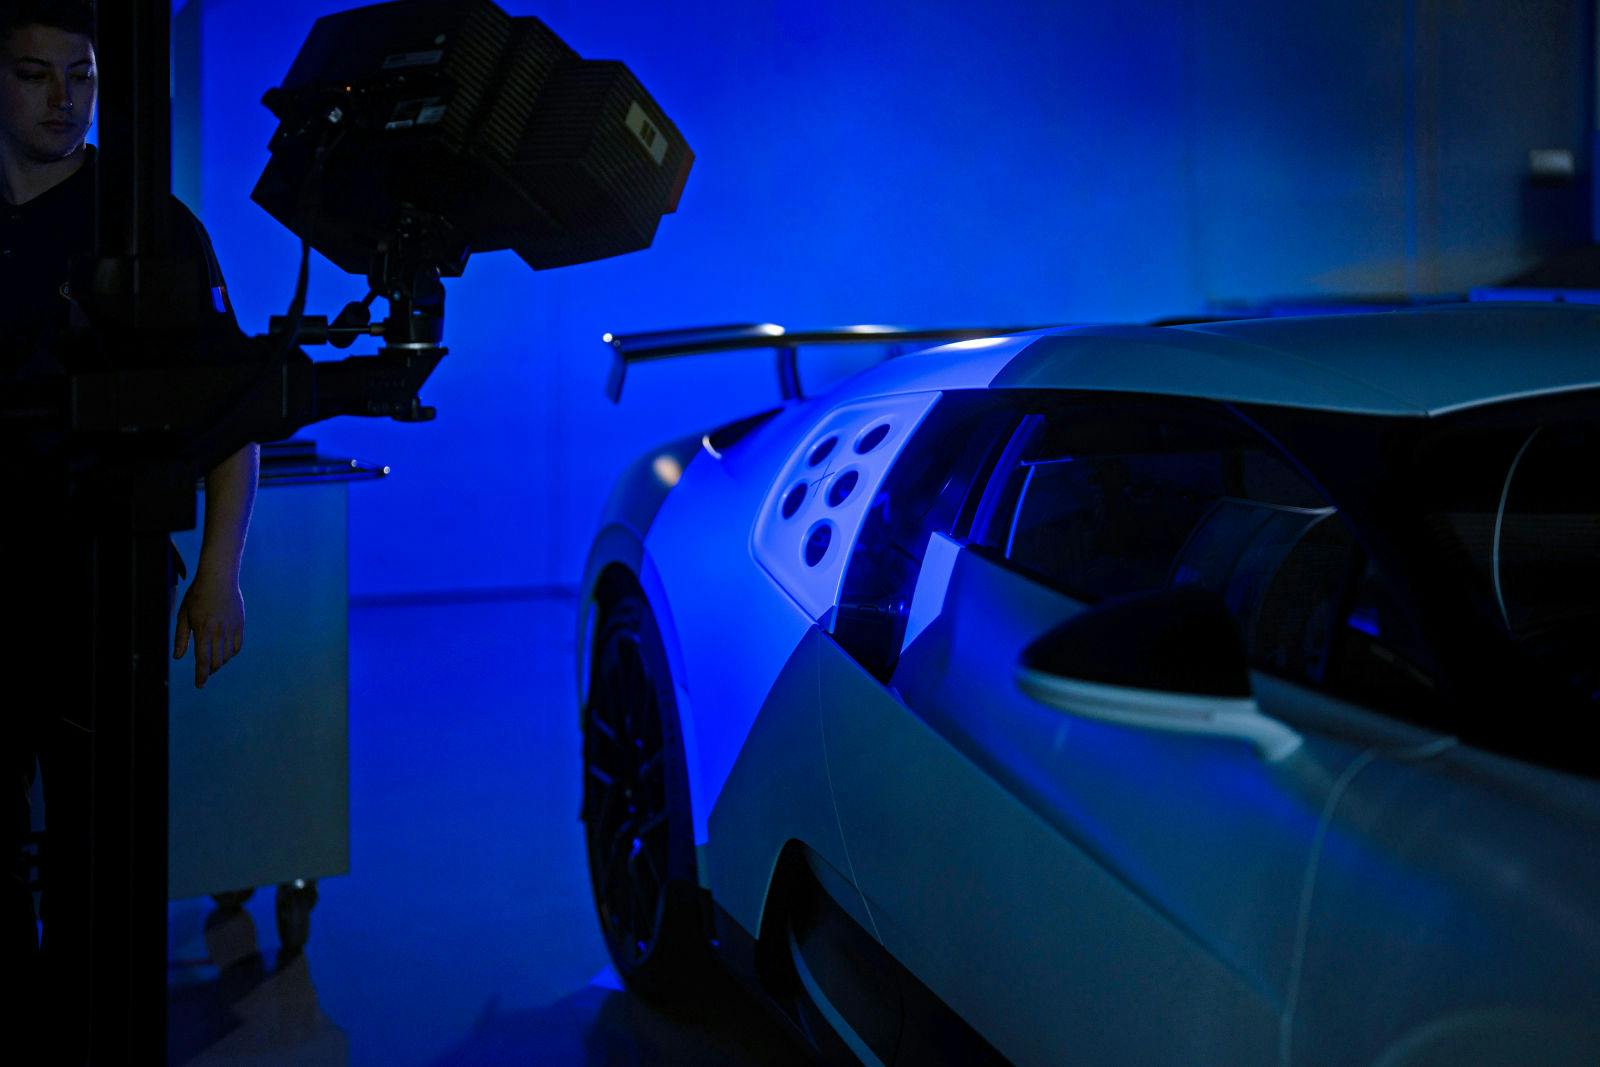 At Bugatti, the metrologist works with state-of-the-art technologies such as advanced 3D scanning.